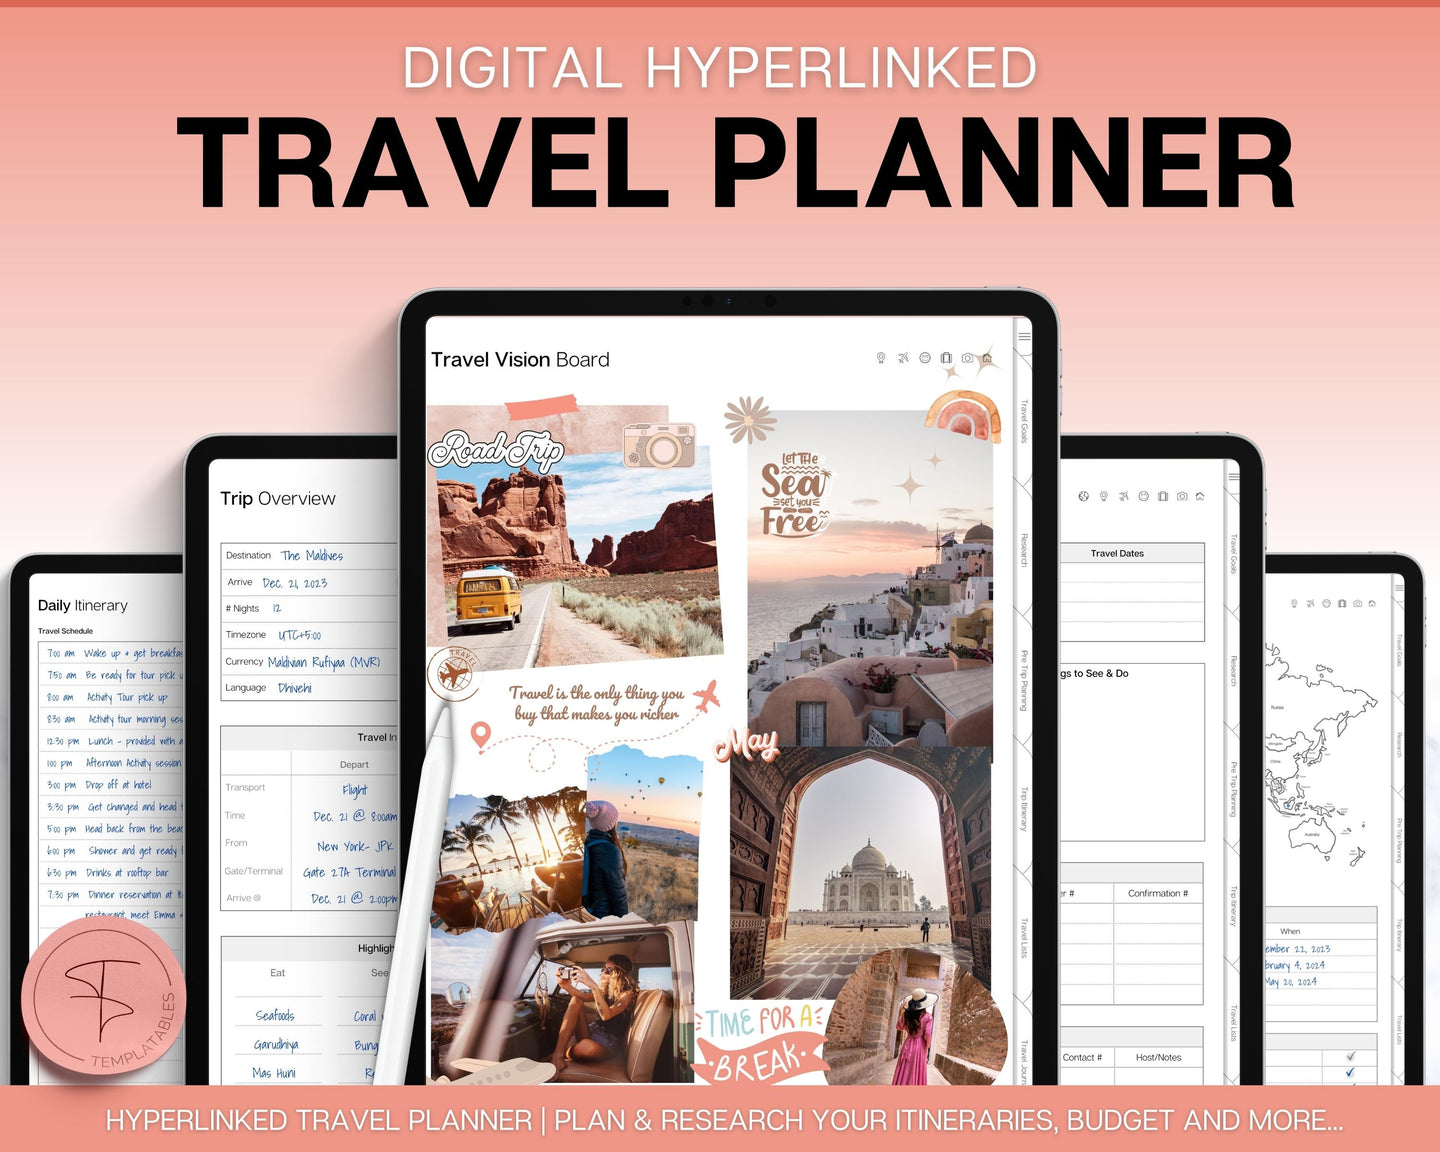 Digital Travel Planner | iPad & GoodNotes Travel Journal, Packing List & Travel Itinerary for Vacations & Trips